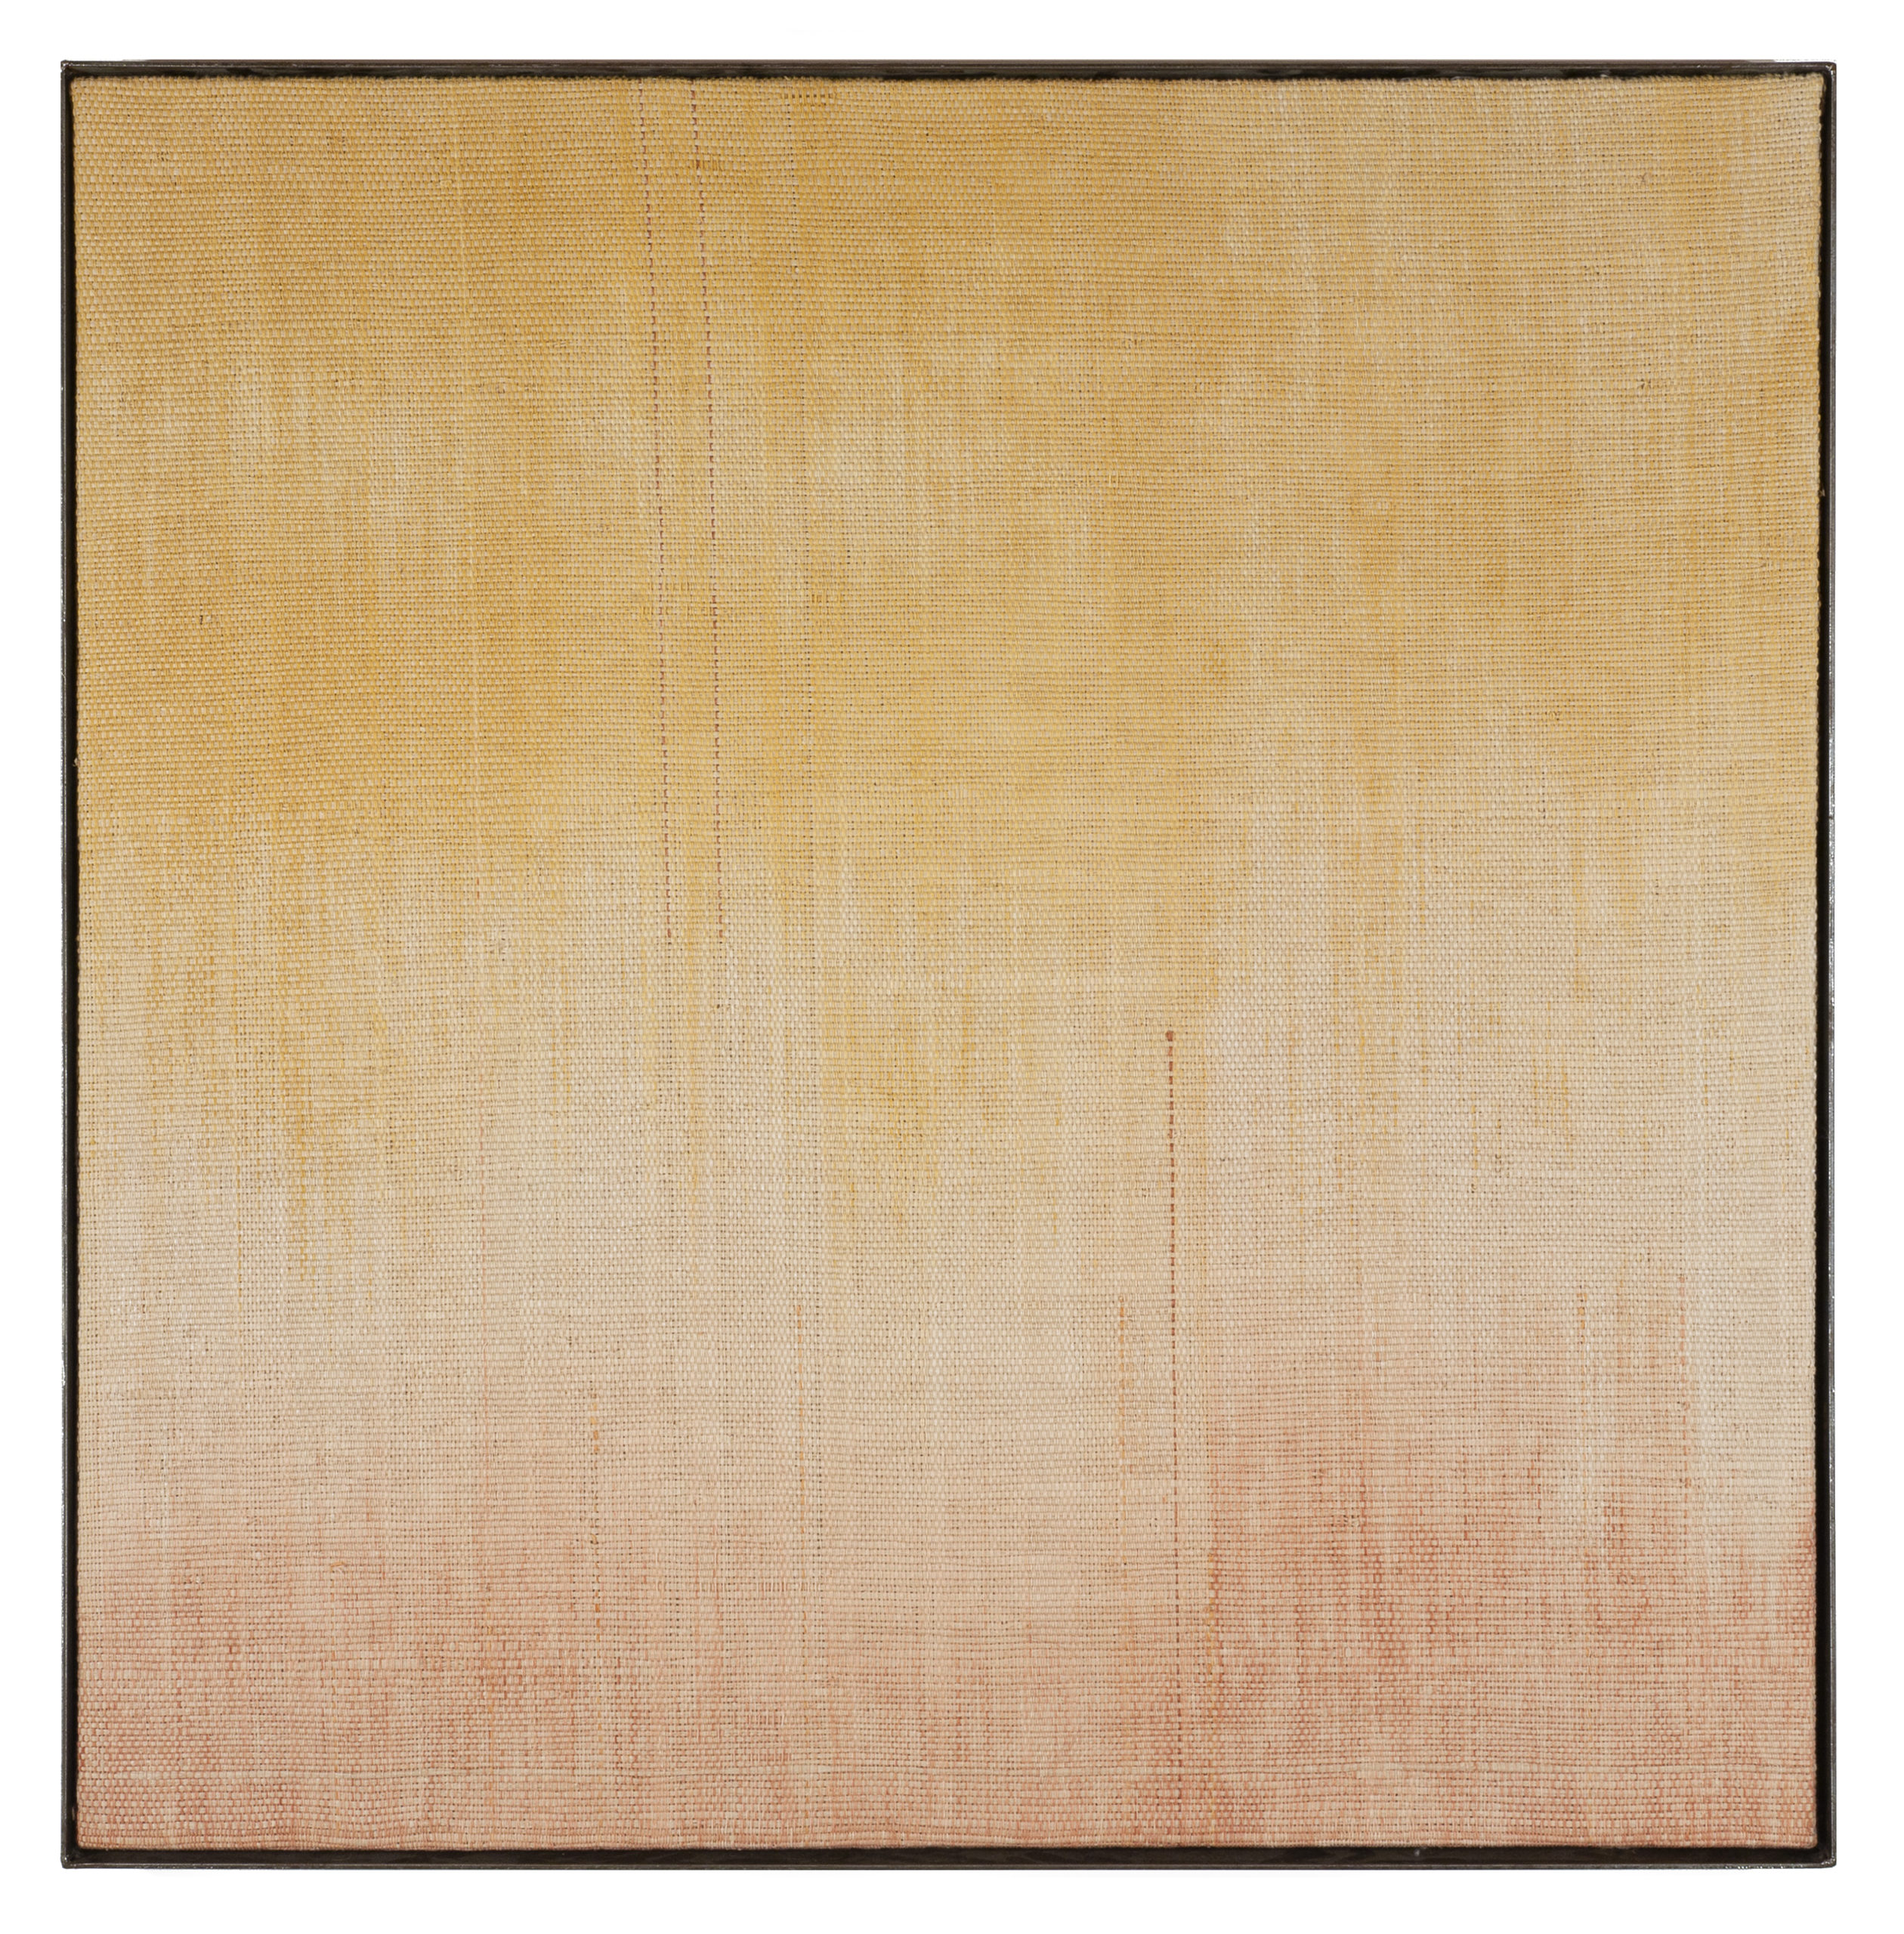 

											Will Clift and Elizabeth Hohimer</b>

											<em>
												Desert Variations</em> 

											<h4>
												Santa Fe: May 28 - August 20, 2022											</h4>

		                																																													<i>Just a Little Bit Longer Where It's Warm,</i>  
																																								2021, 
																																								West Texas cotton dyed with collected clay, pine paper, and silk tapestry in steel frame., 
																																								37 x 36 3/4 x 2 1/2 inches 
																								
		                				